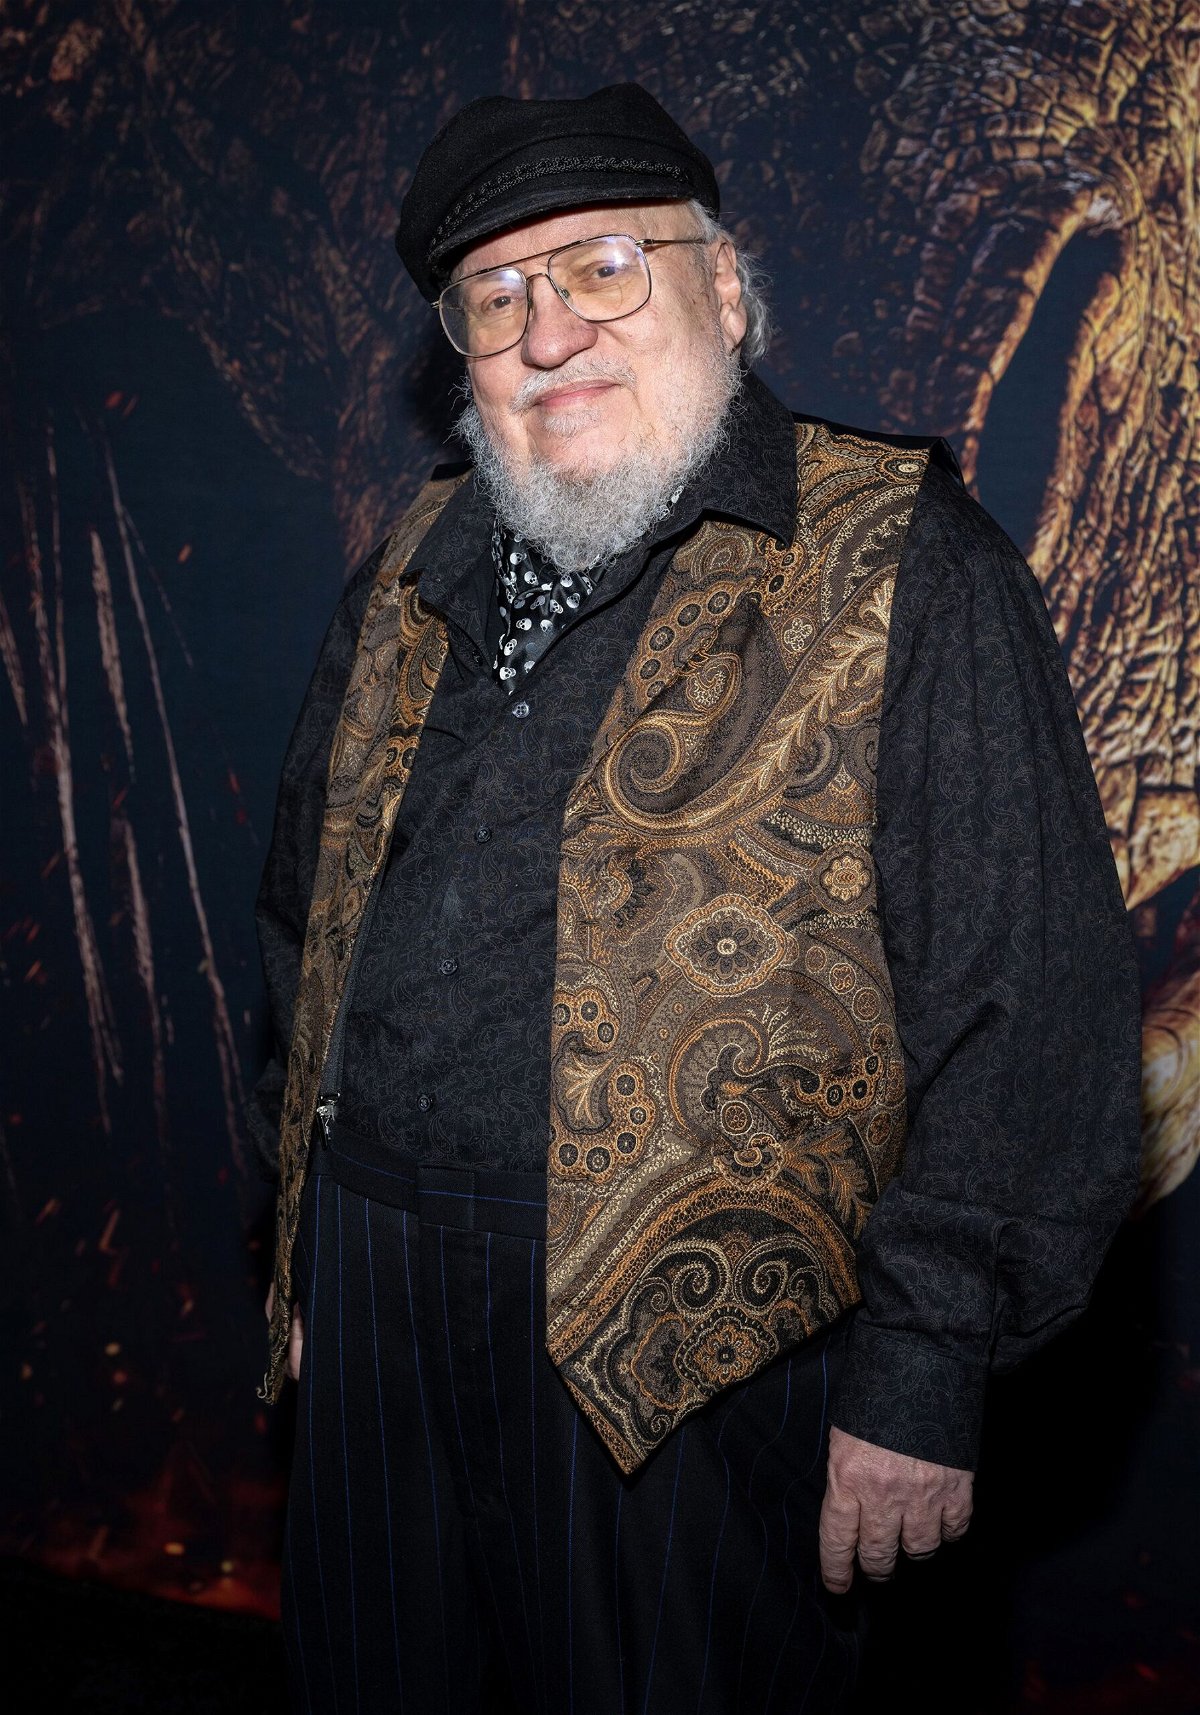 <i>Amanda Edwards/WireImage/Getty Images</i><br/>George R. R. Martin said the previously announced “House of the Dragon” prequel “Nine Voyages